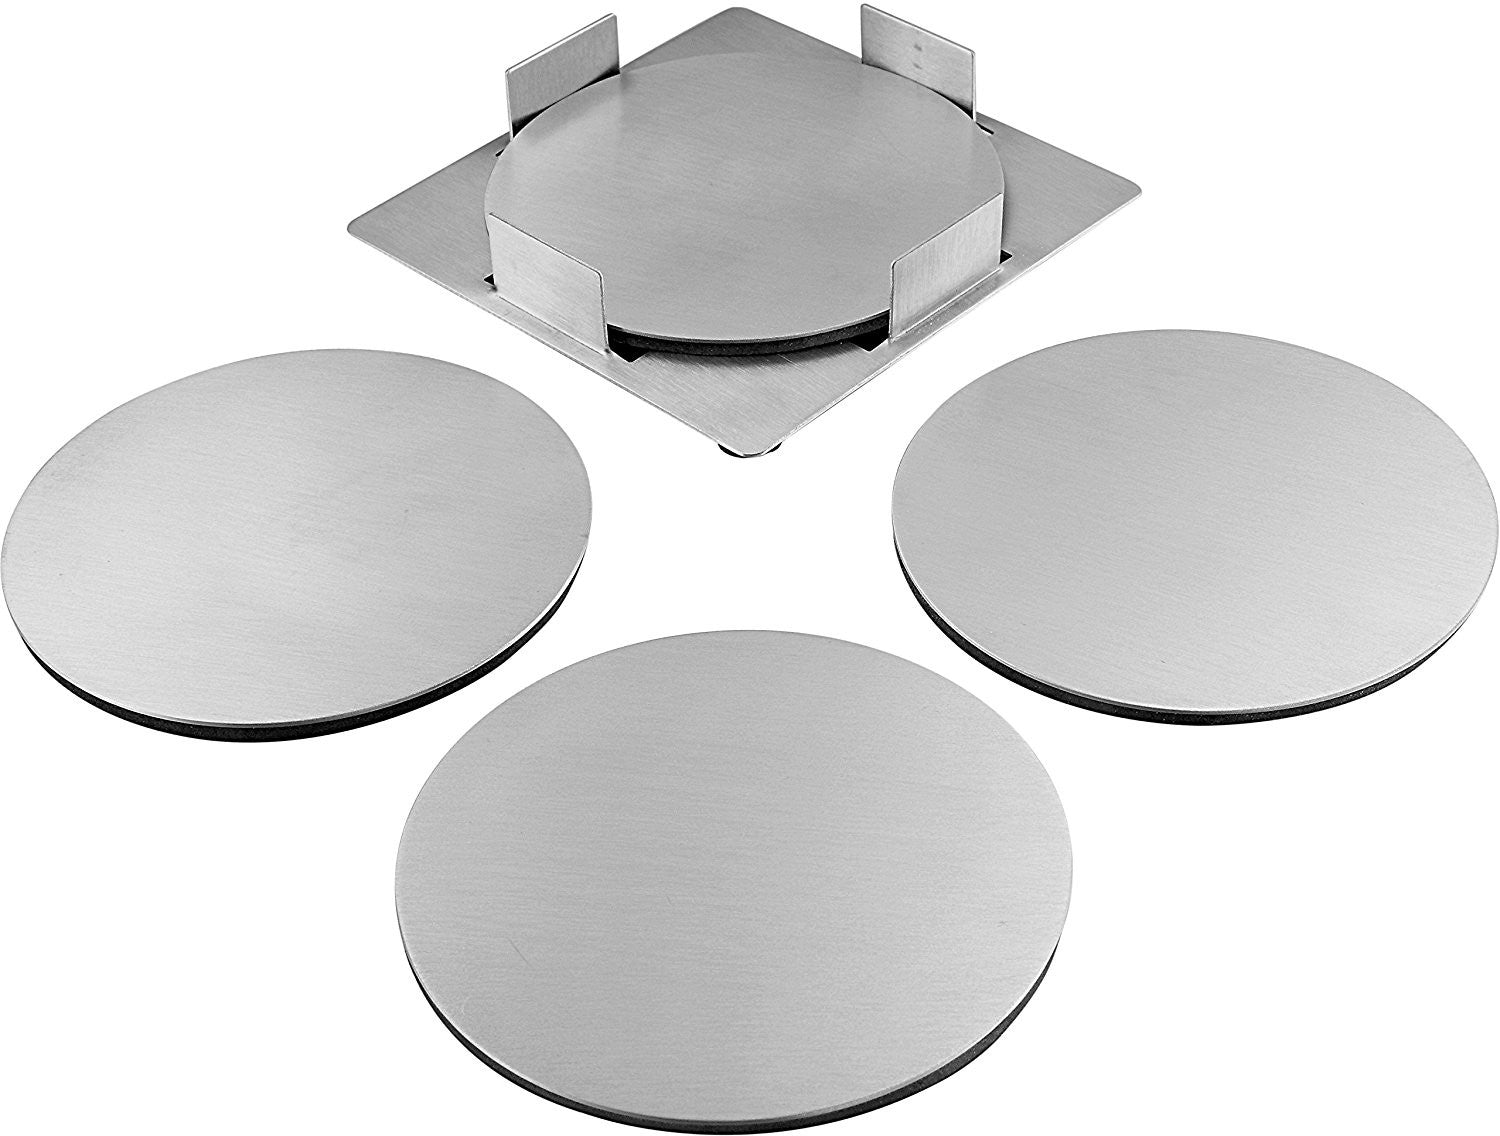 Stainless Square Drink Coasters Set of 4 - Pro Chef Kitchen Tools